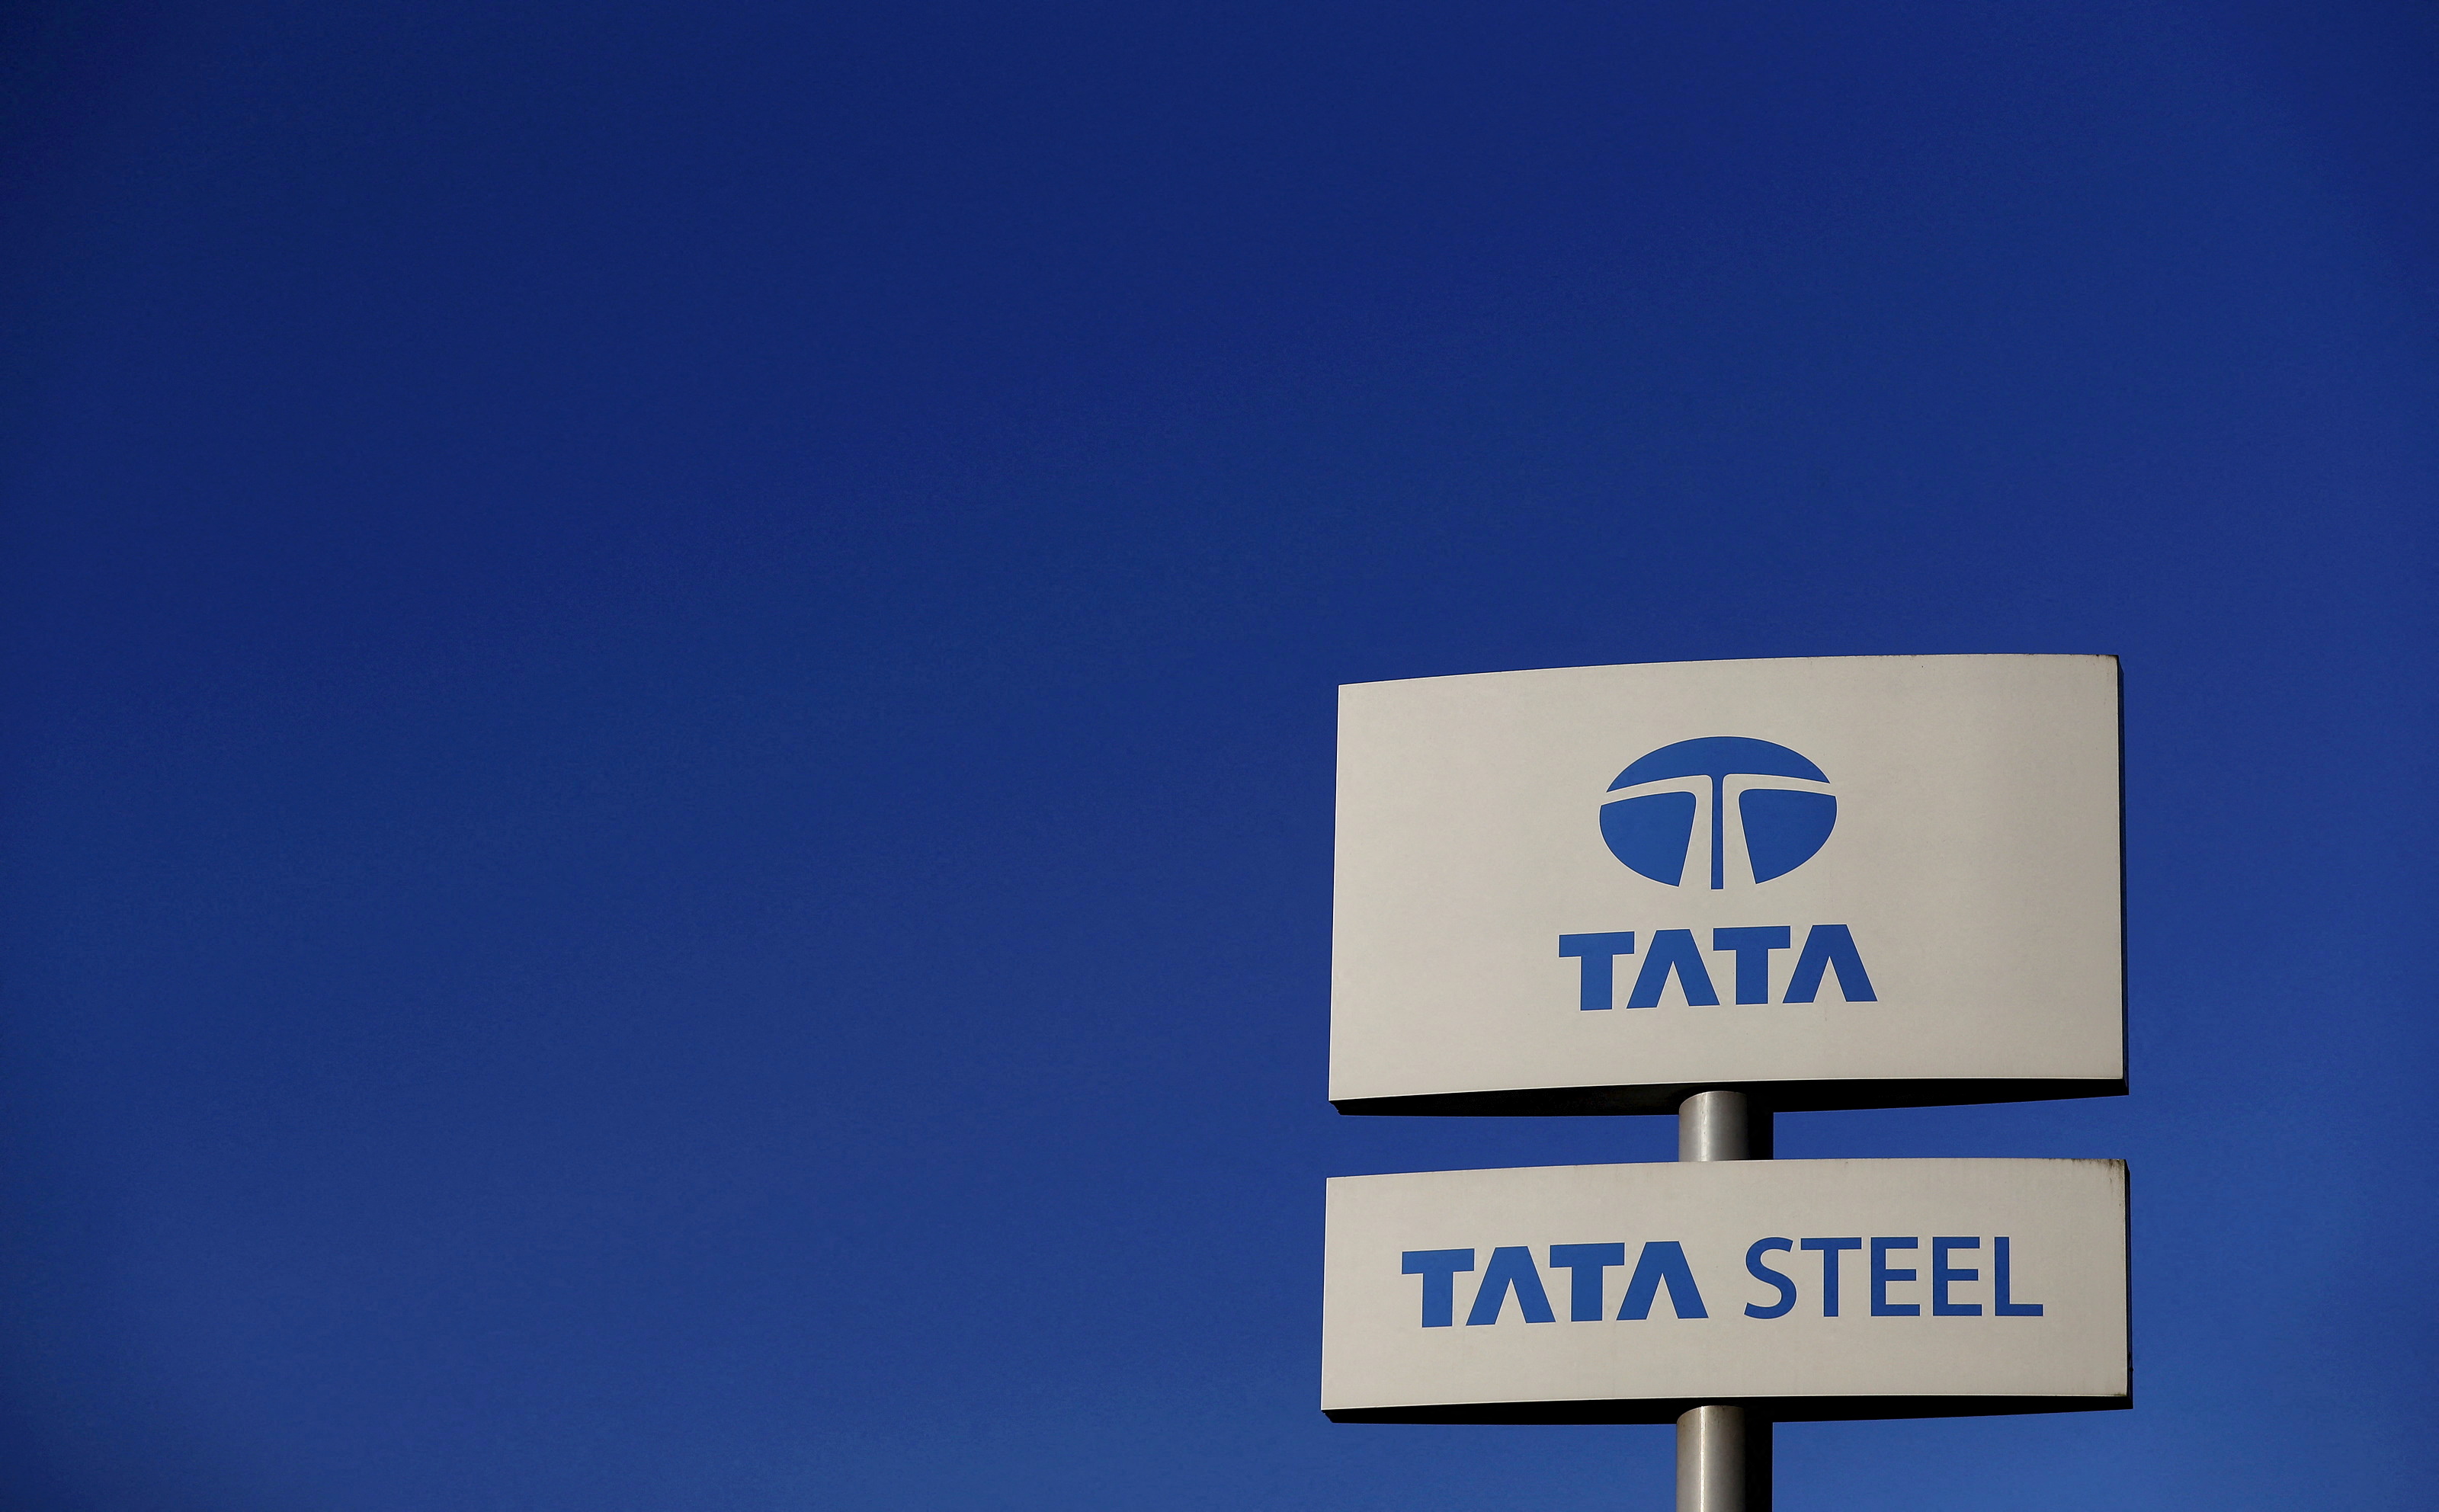 Company logo seen outside the Tata steelworks near Rotherham in Britain